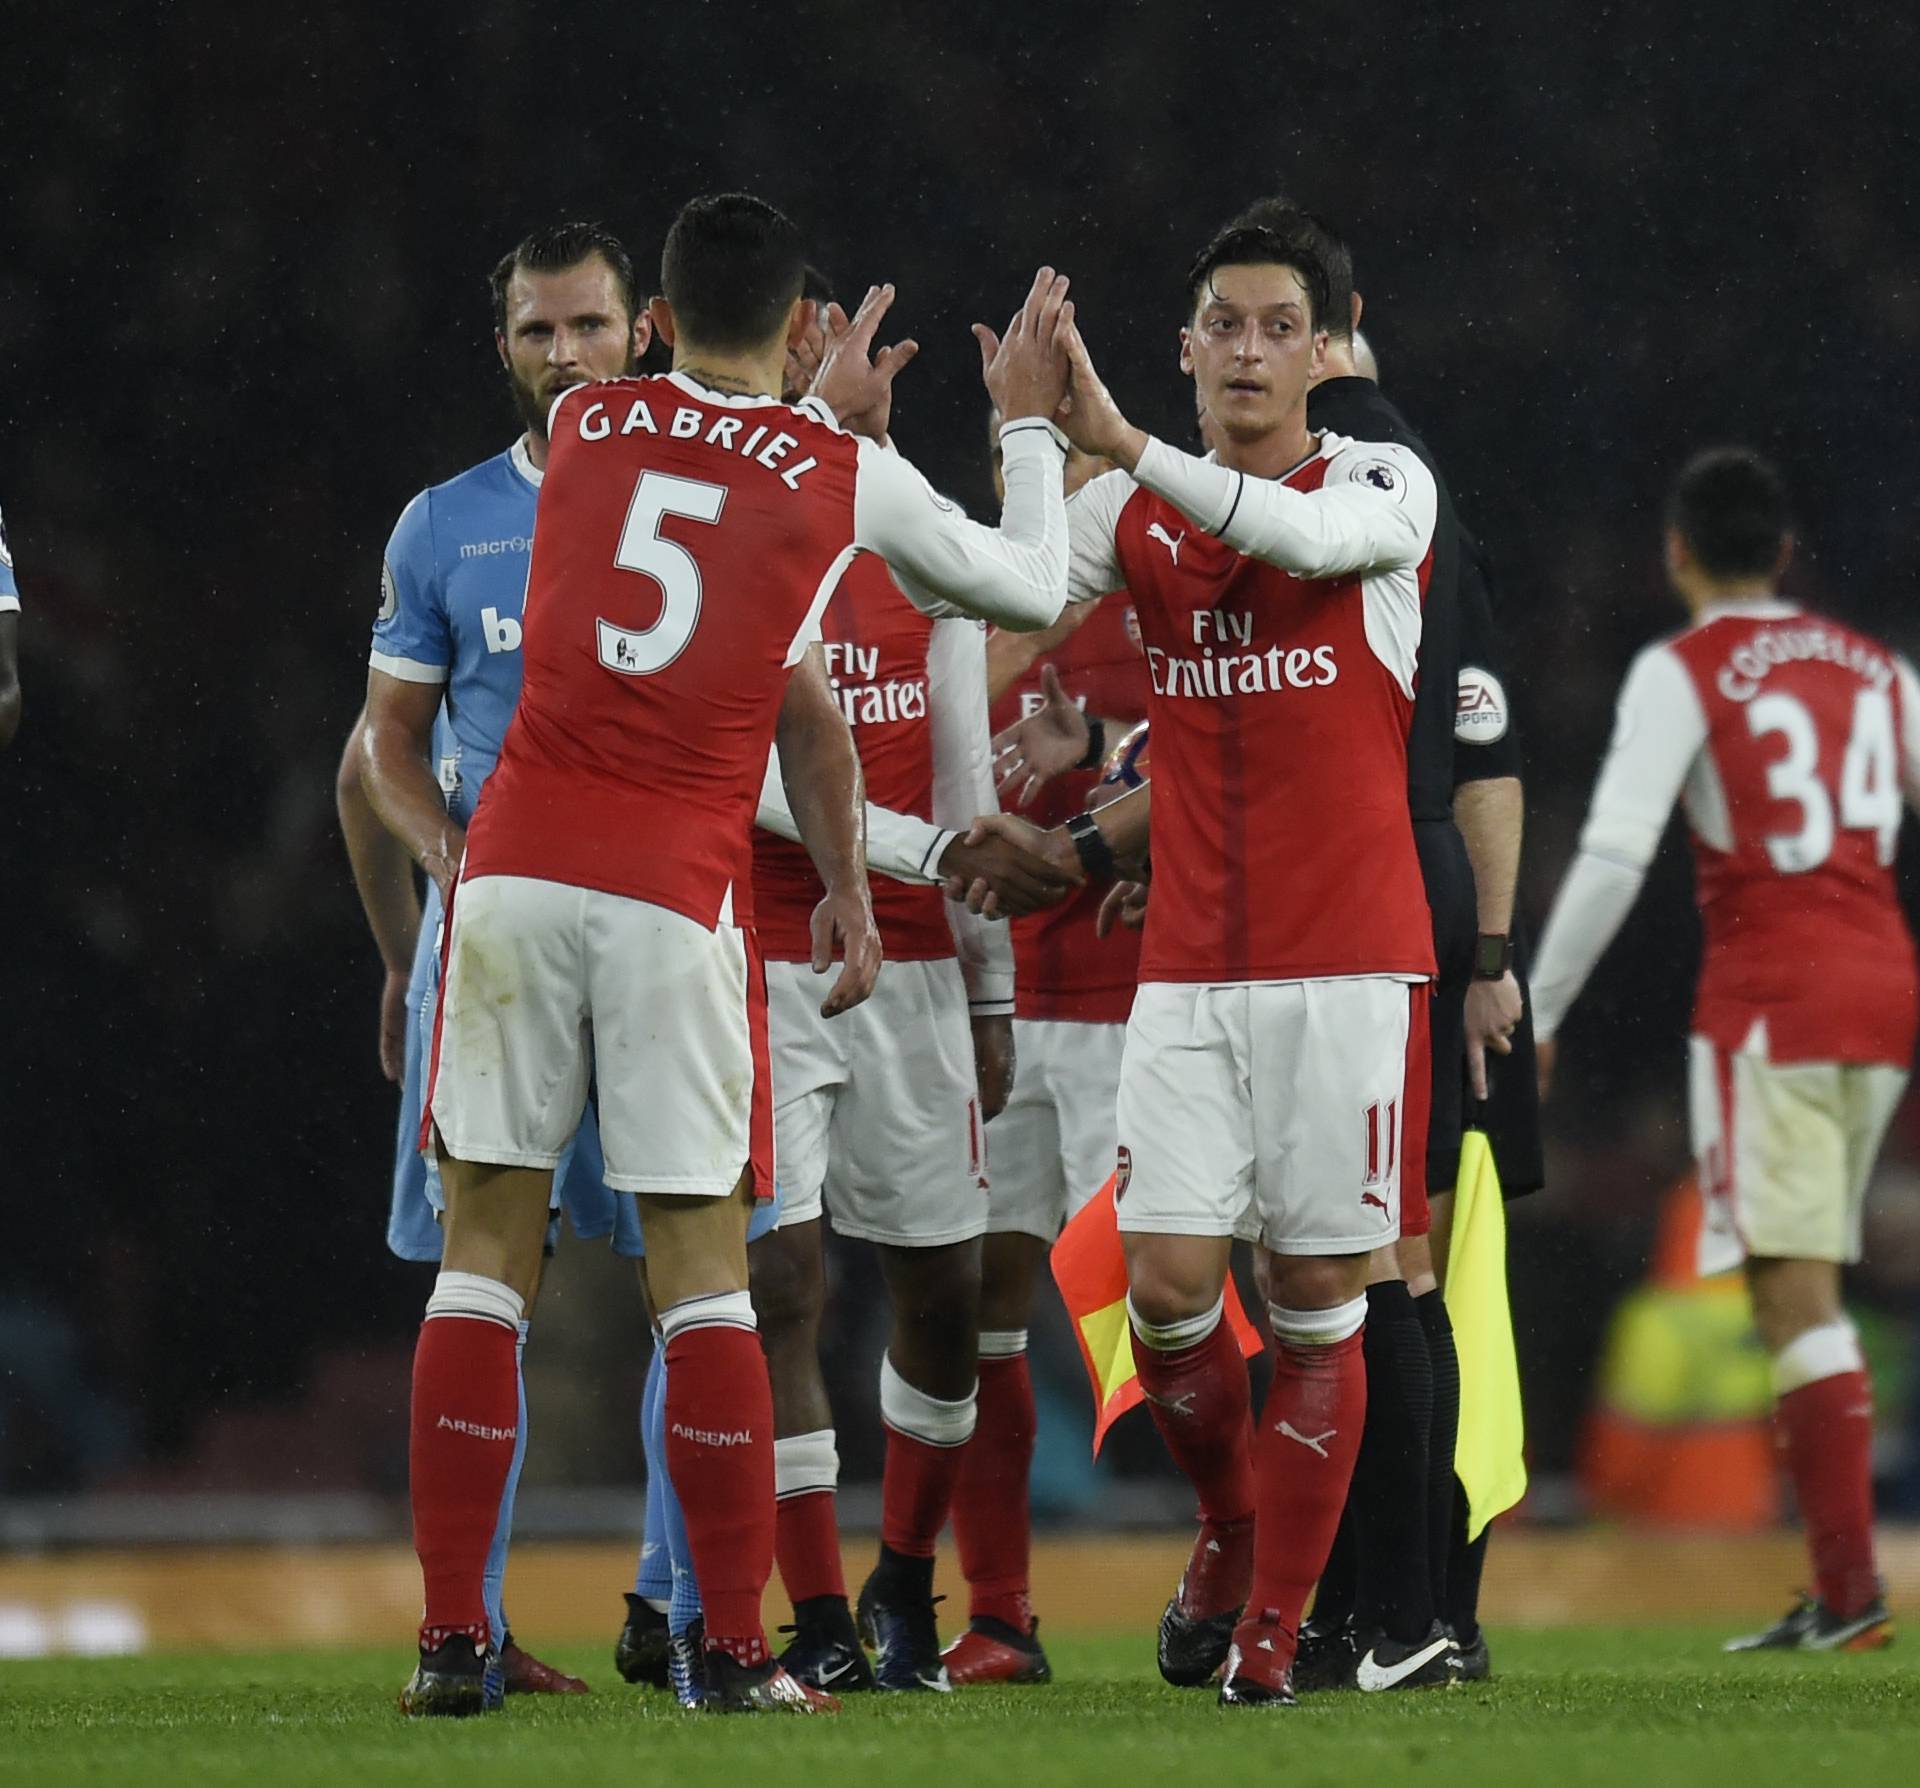 Arsenal's Gabriel Paulista and Mesut Ozil celebrate after the game